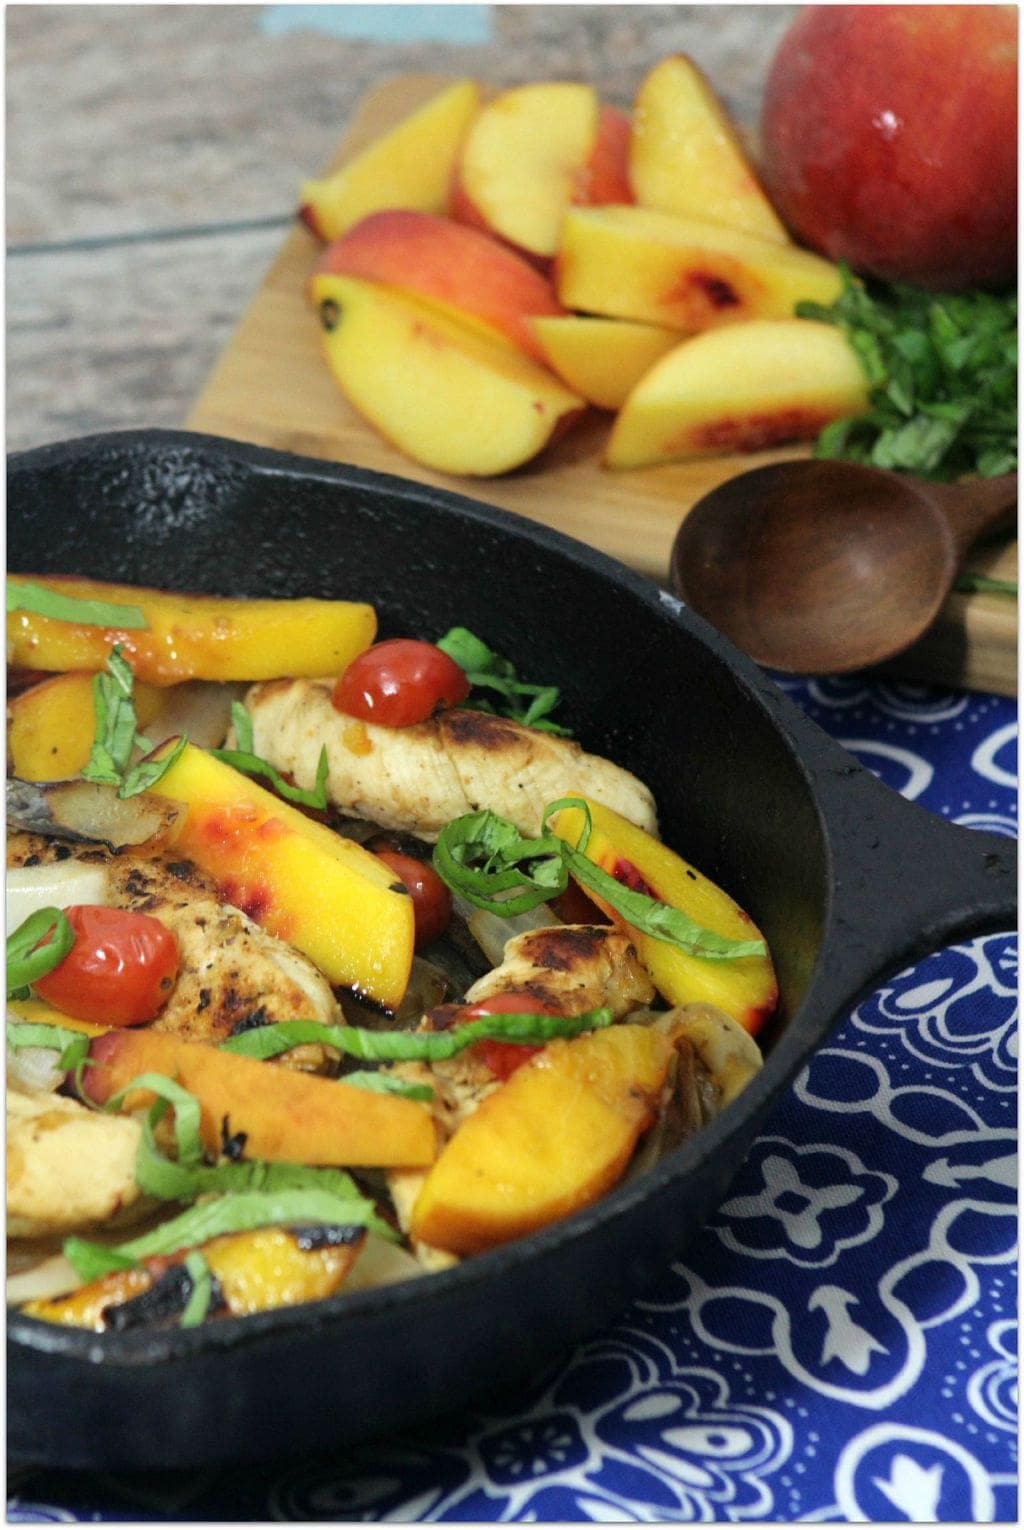 This chicken and peaches with balsamic reduction is such a delicious easy recipe. Peaches are so good in the summer, but you can find them throughout the year now. If you’ve never made a chicken recipe with peaches you are in for a treat! Now that autumn is here, busy moms are looking for new dinner recipes. I think you’ll find it to be an easy dinner your family will love!